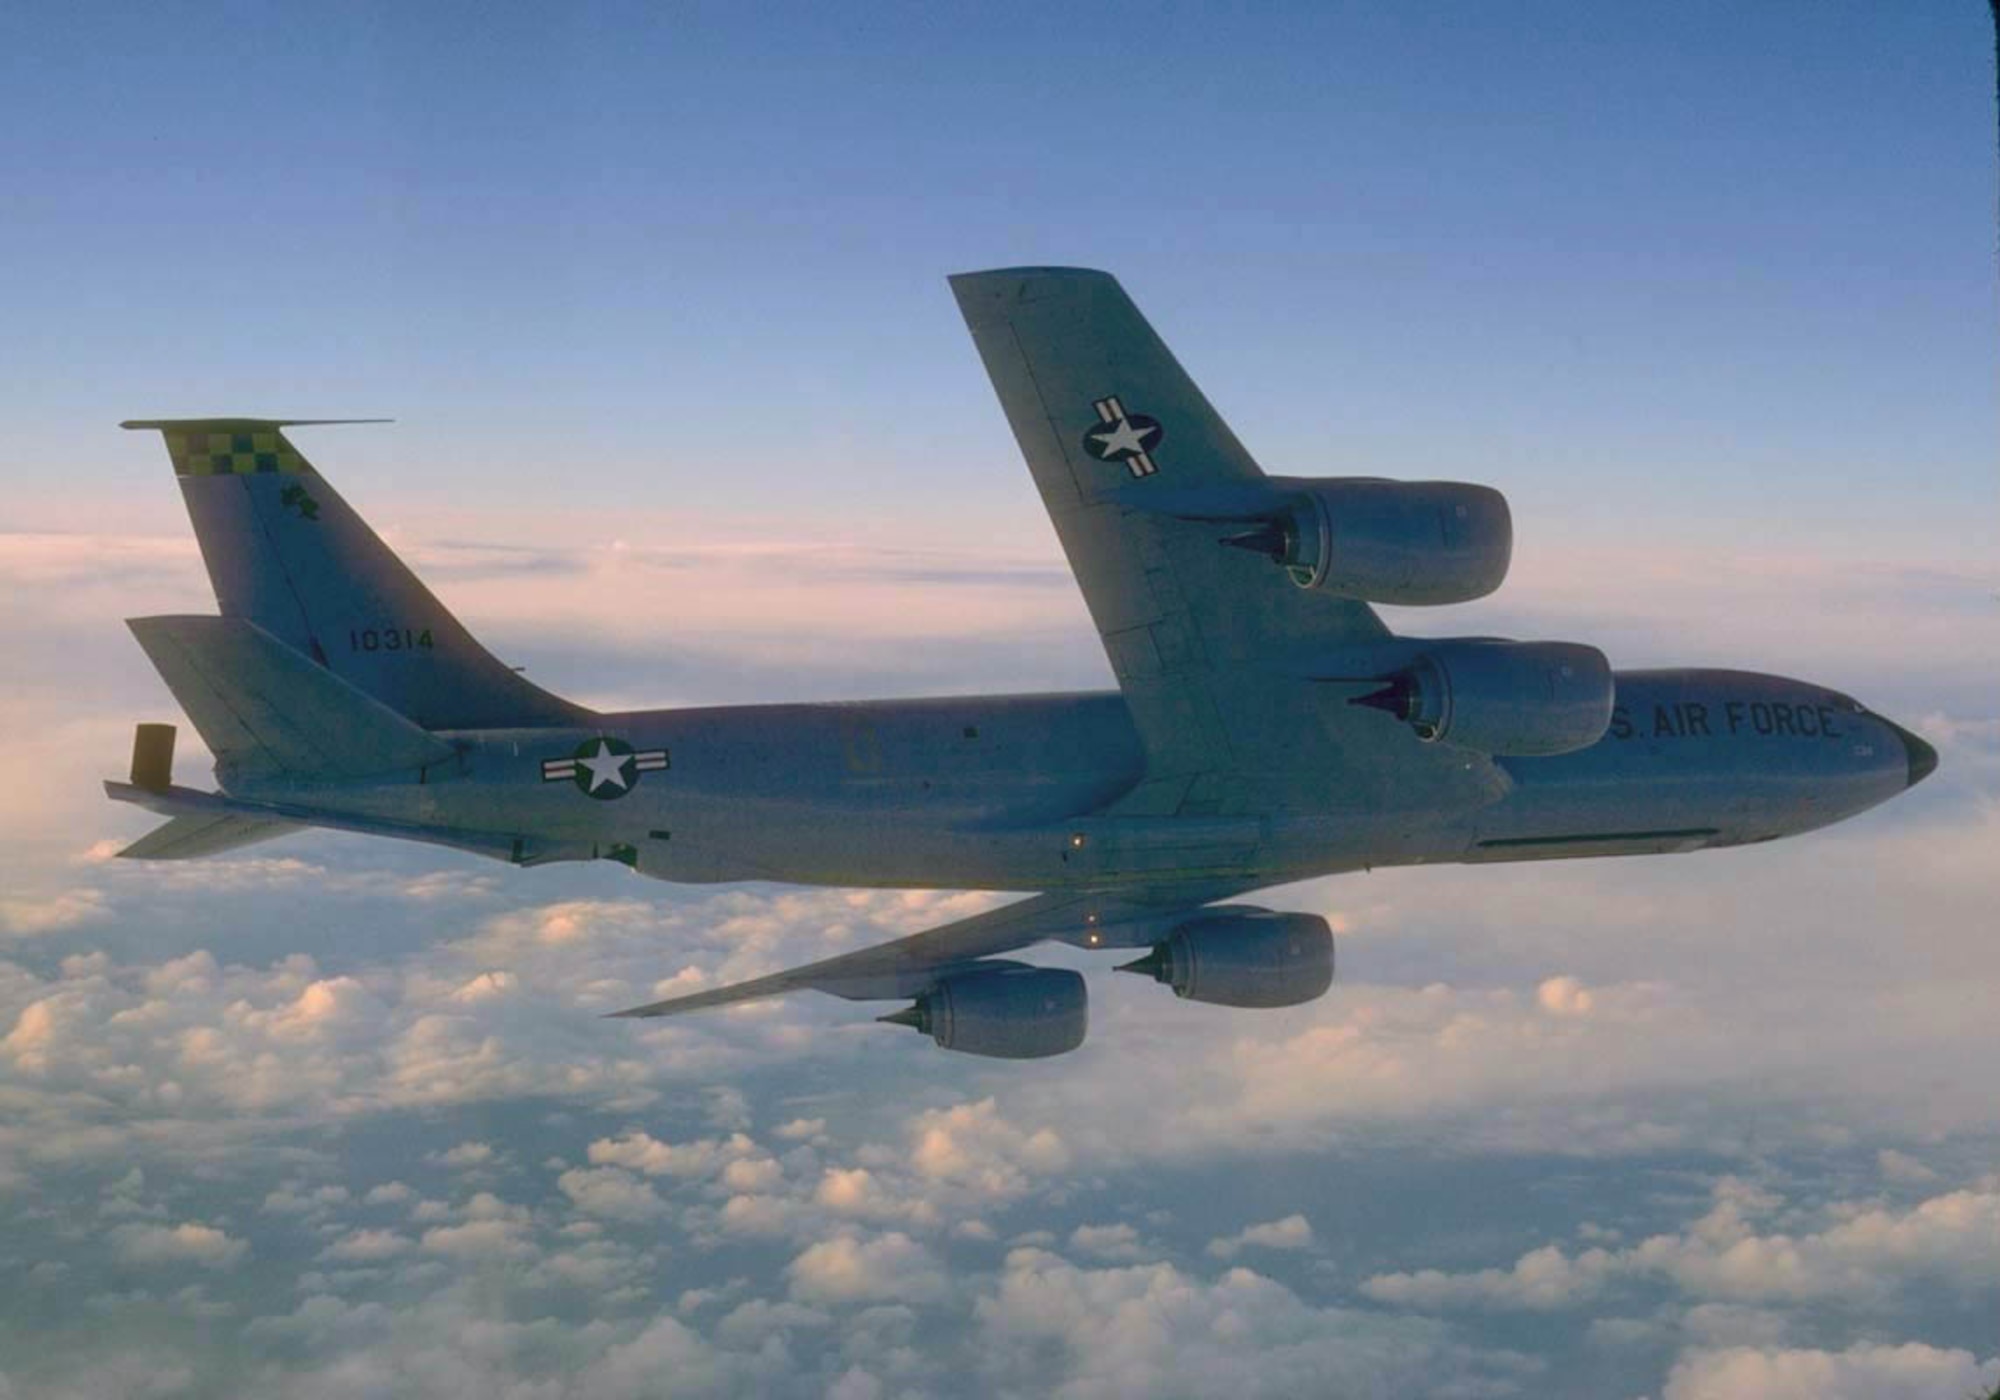 FILE PHOTO -- The KC-135 Stratotanker's primary mission is to refuel long-range bombers. It also provides aerial refueling support to Air Force, Navy, Marine Corps and allied aircraft. Four turbojets, mounted under wings swept 35 degrees, power the KC-135. Nearly all internal fuel can be pumped through the tanker's flying boom, the KC-135's primary fuel transfer method. A special shuttlecock-shaped drogue, attached to and trailed behind the flying boom, is used to refuel aircraft fitted with probes. An operator stationed in the rear of the plane controls the boom. A cargo deck above the refueling system holds passengers or cargo. Depending on fuel storage configuration, the KC-135 can carry up to 83,000 pounds (37,350 kilograms) of cargo. (U.S. Air Force photo by Master Sgt. Dave Nolan)
